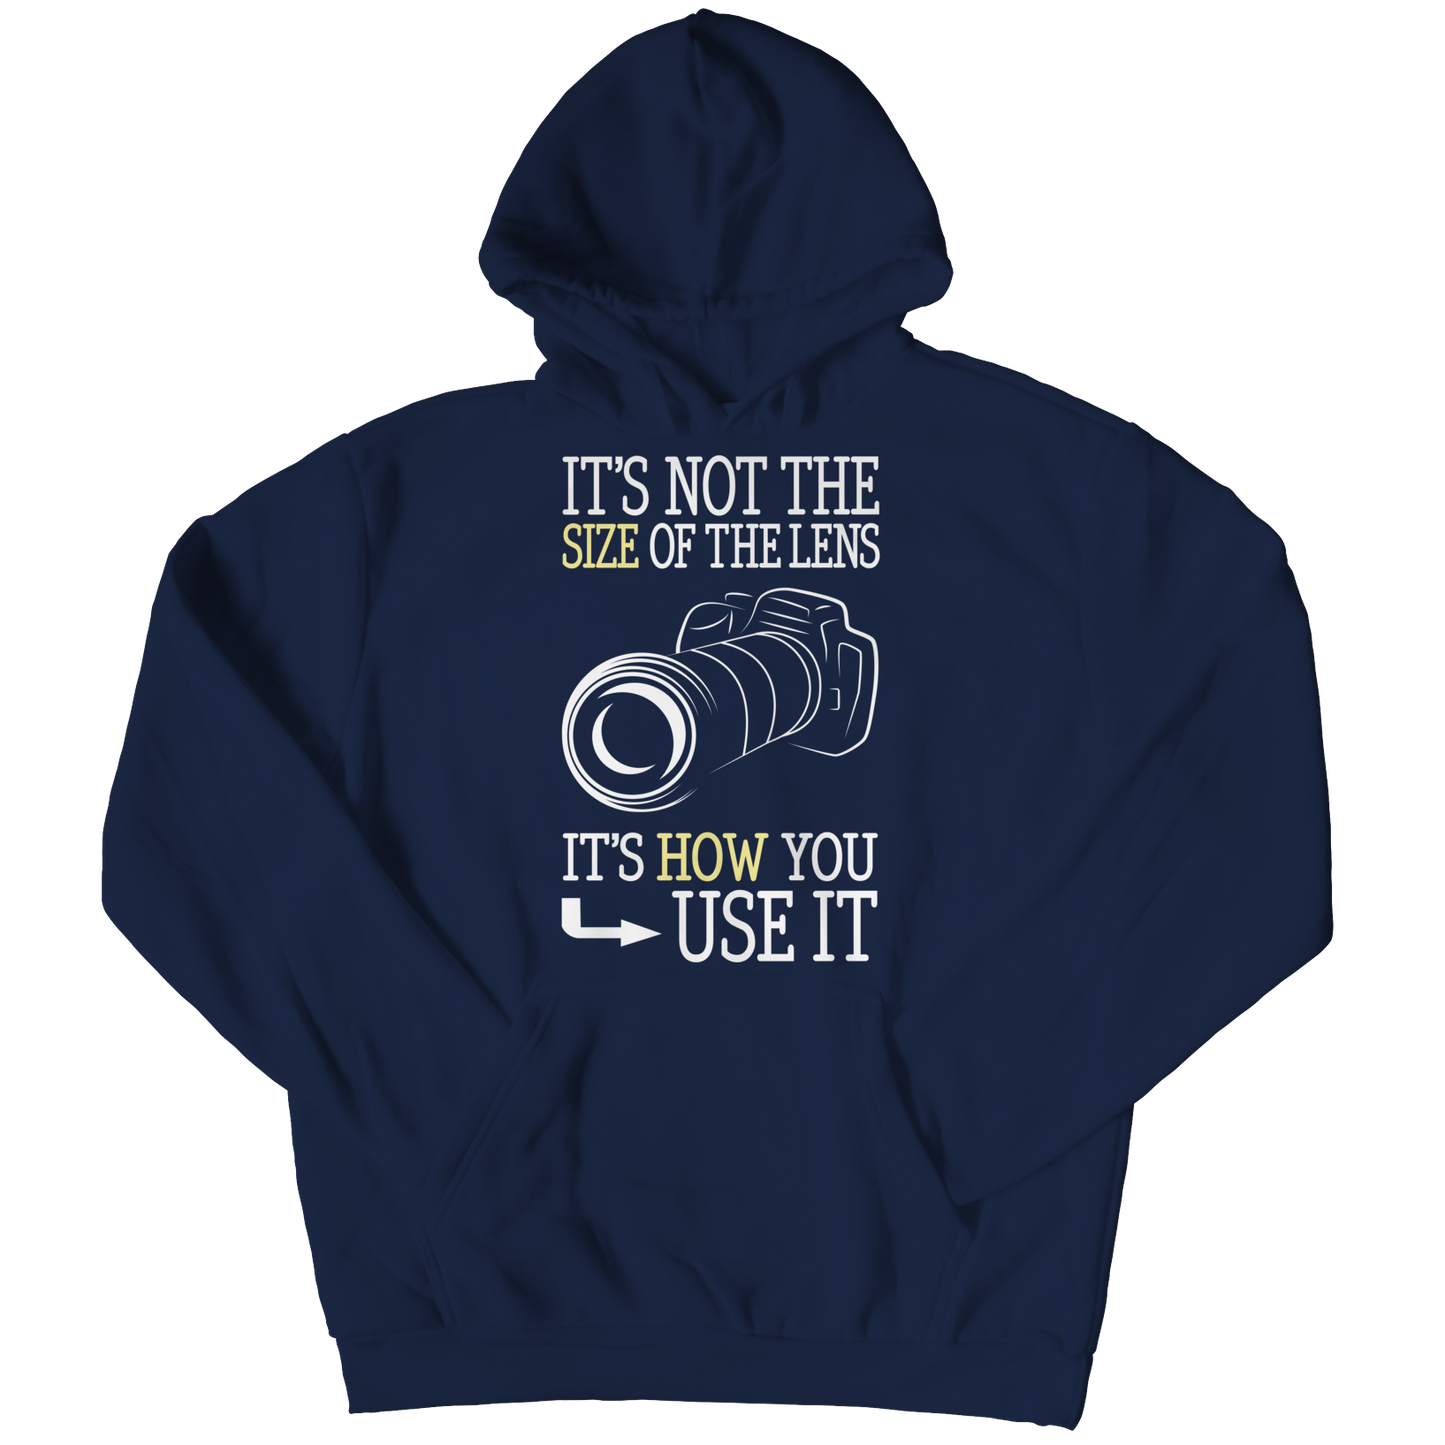 It's Not The Size Of The Lens But How You Use It Shirt